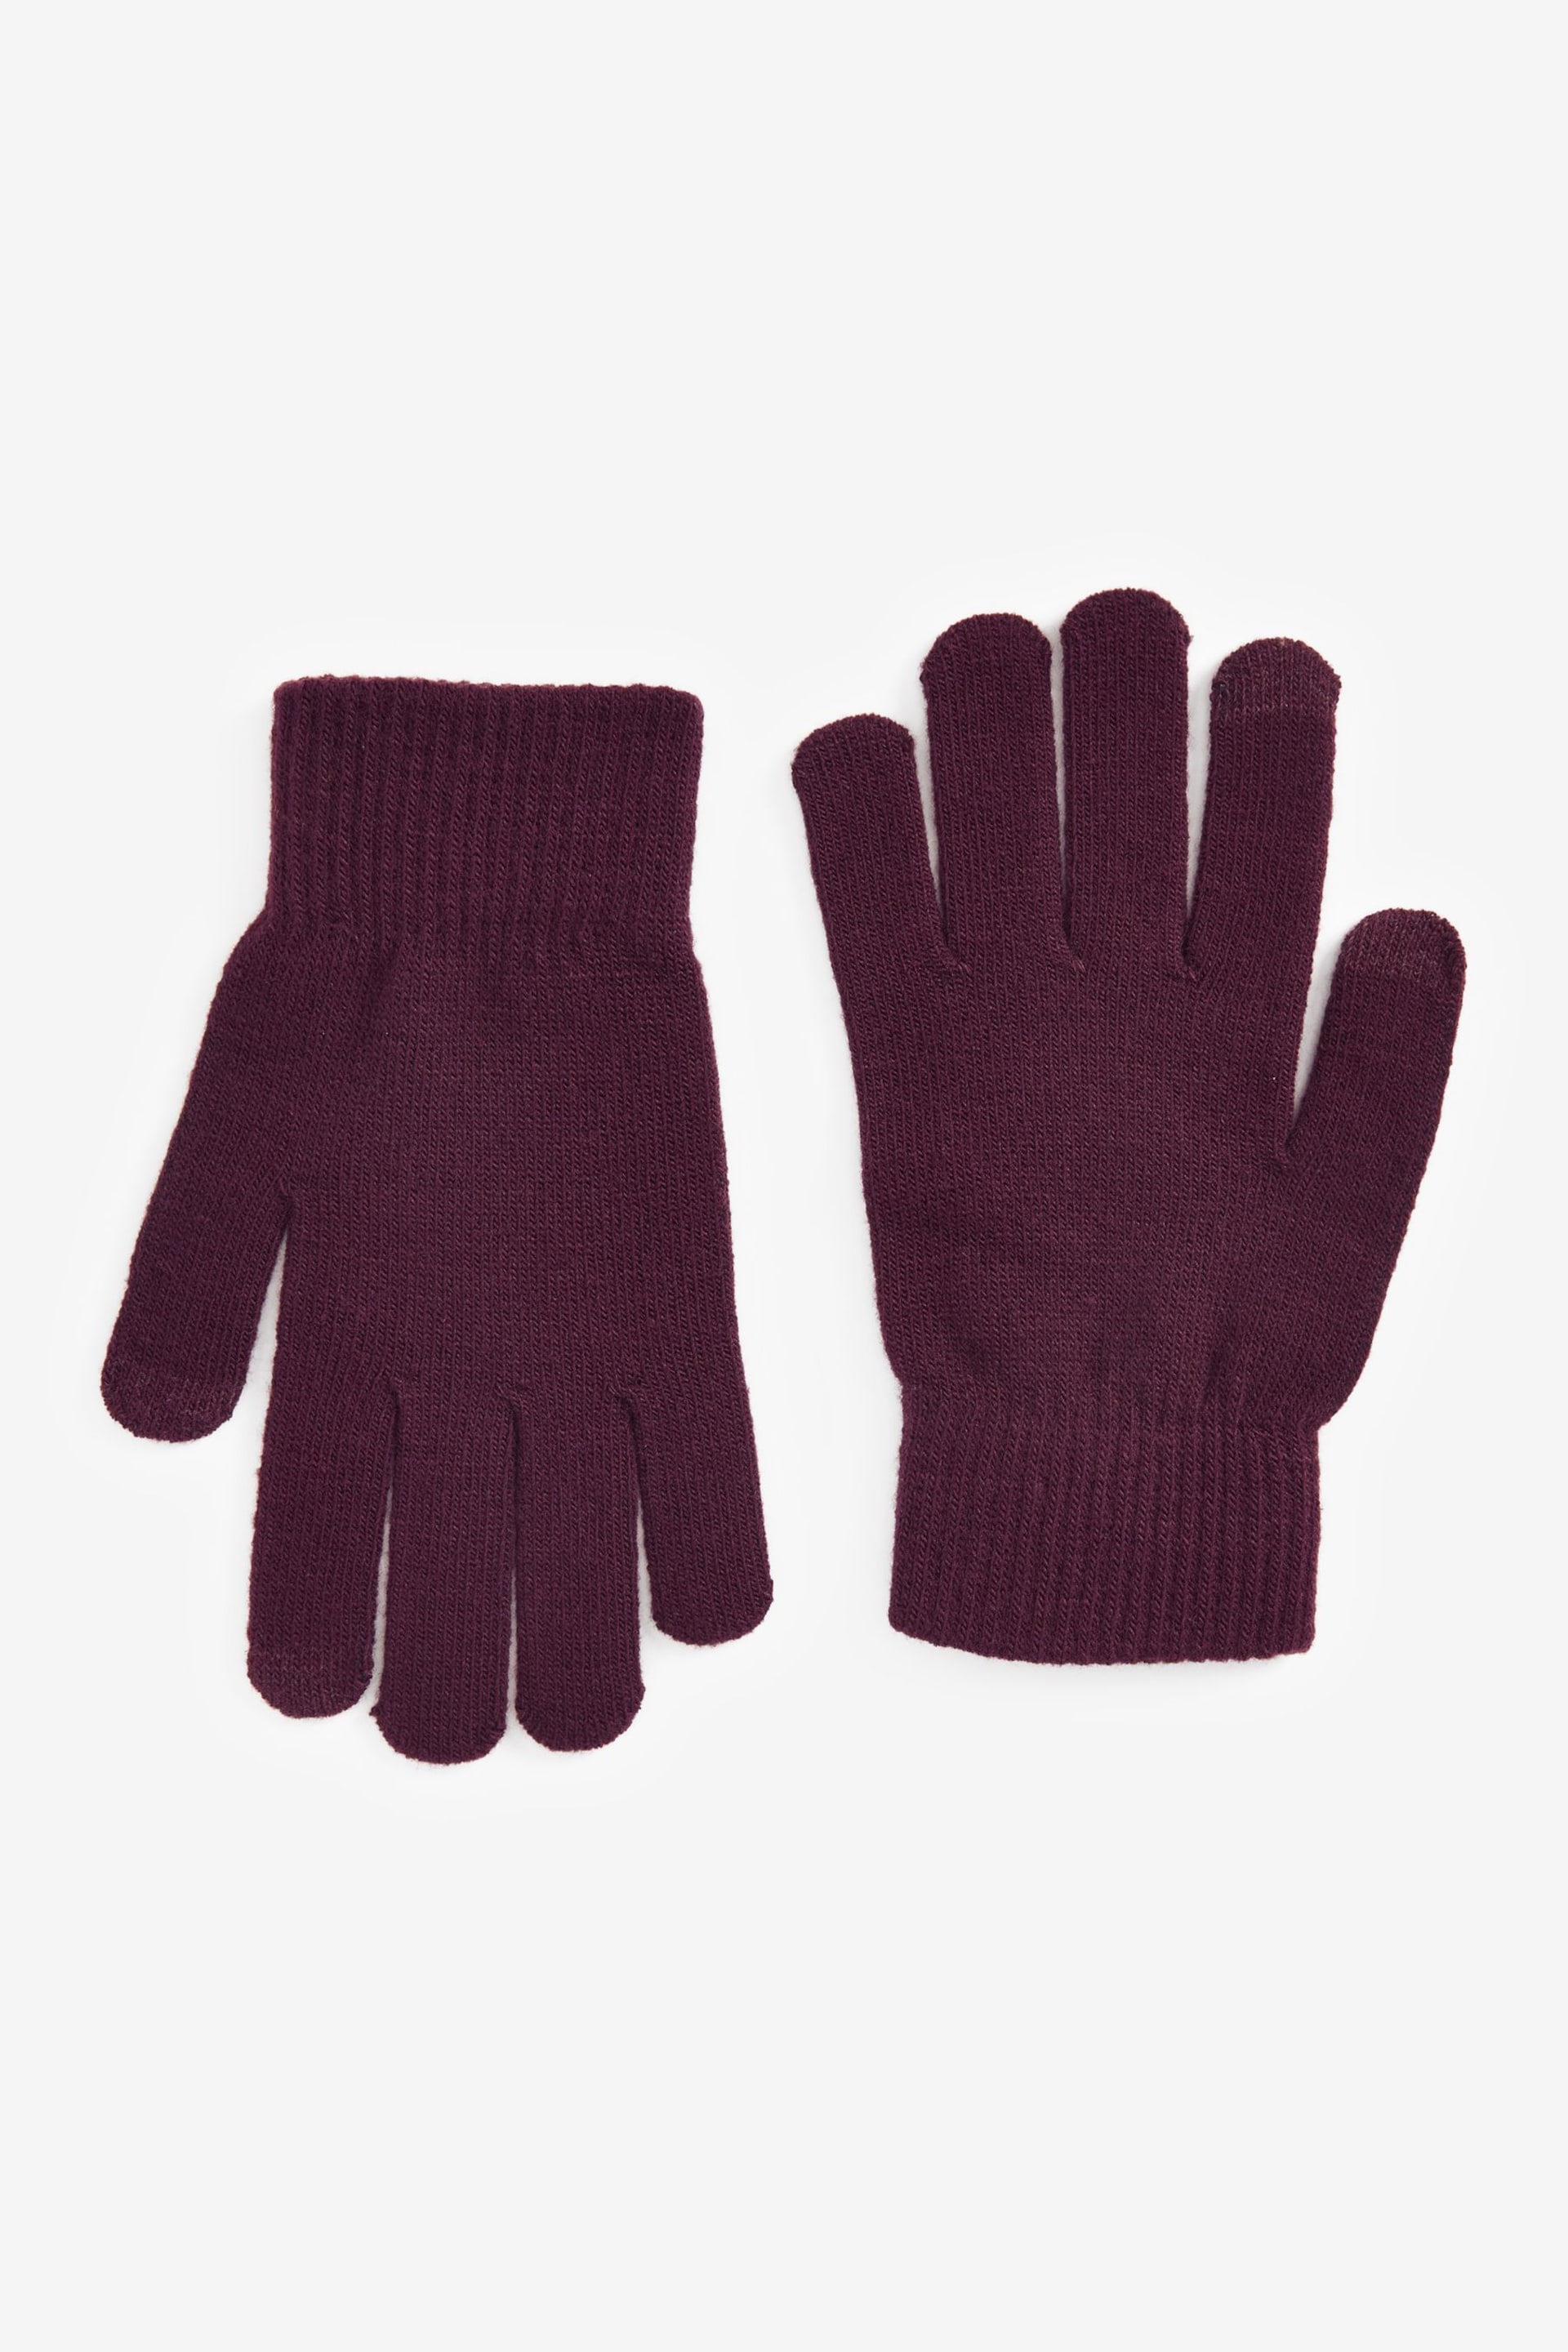 Navy/Red Magic Touchscreen Gloves 2 Pack - Image 3 of 3